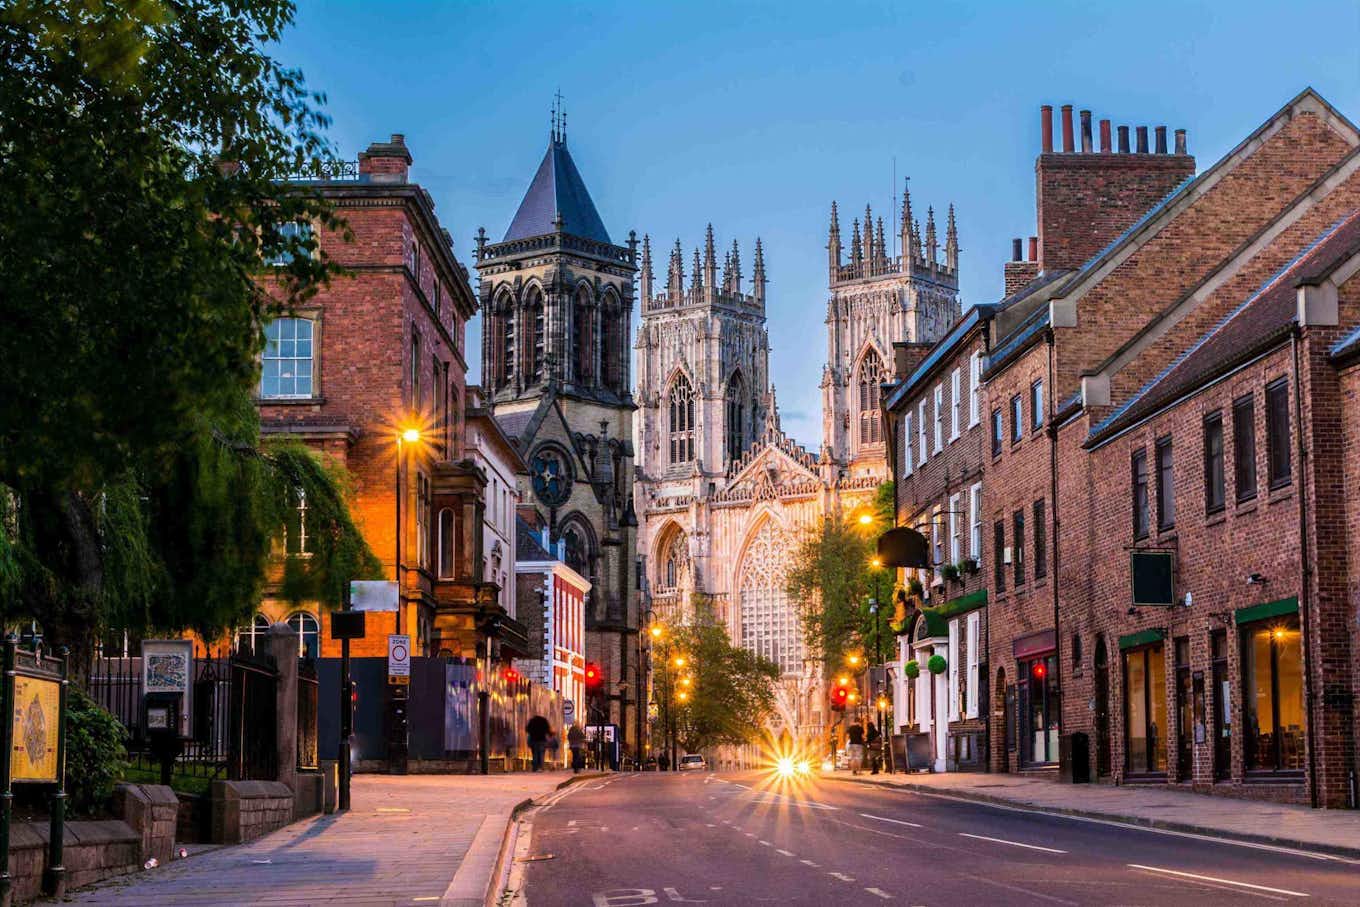 street view of some monuments and buildings in York